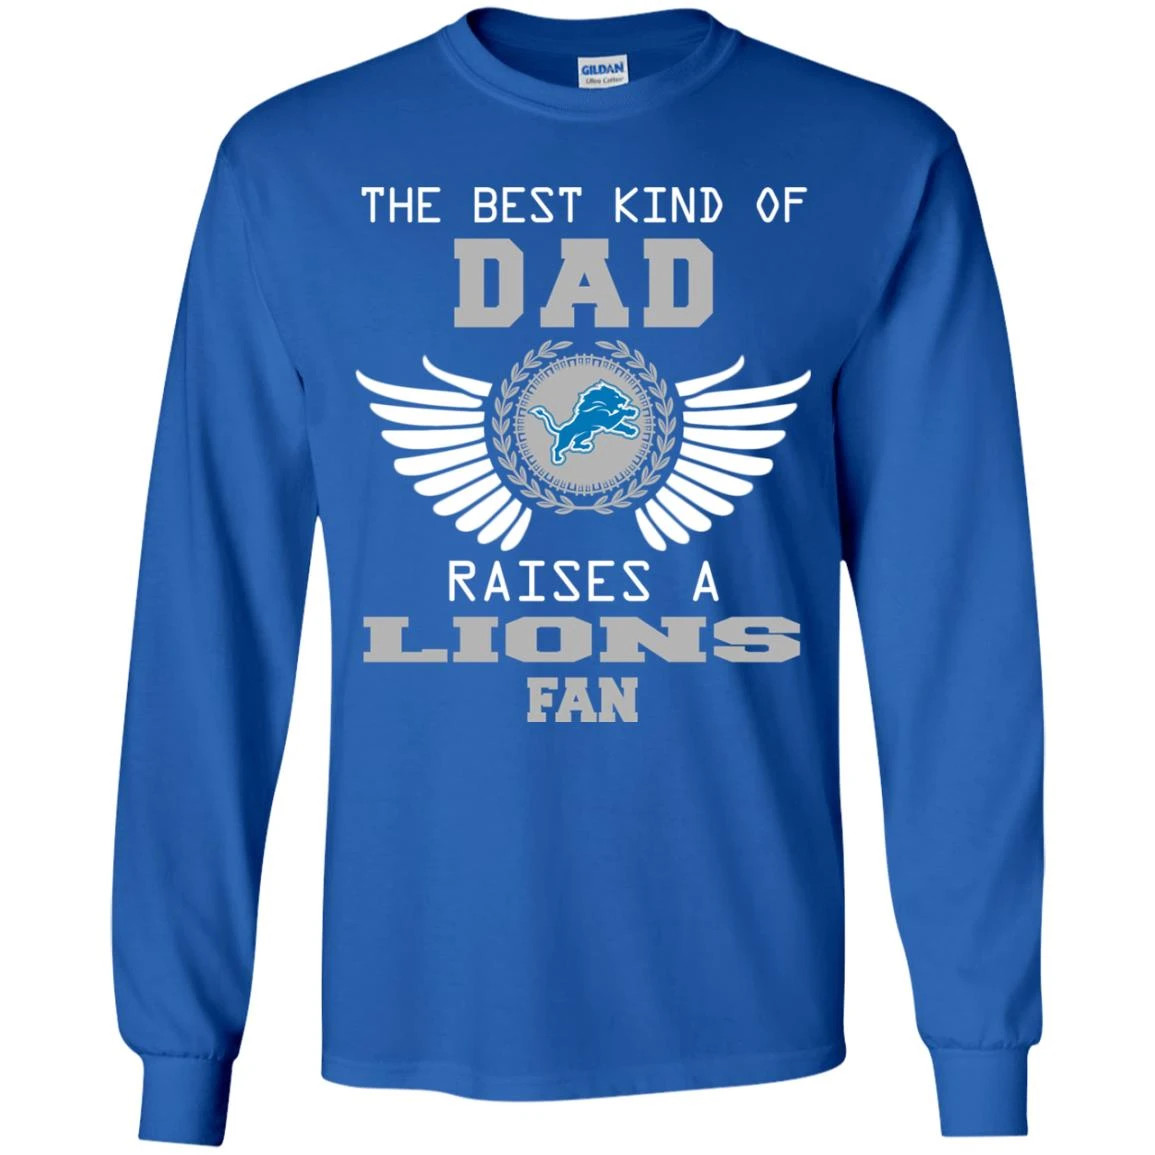 The Best Kind Of Dad Detroit Lions T Shirts - DaisyFaith